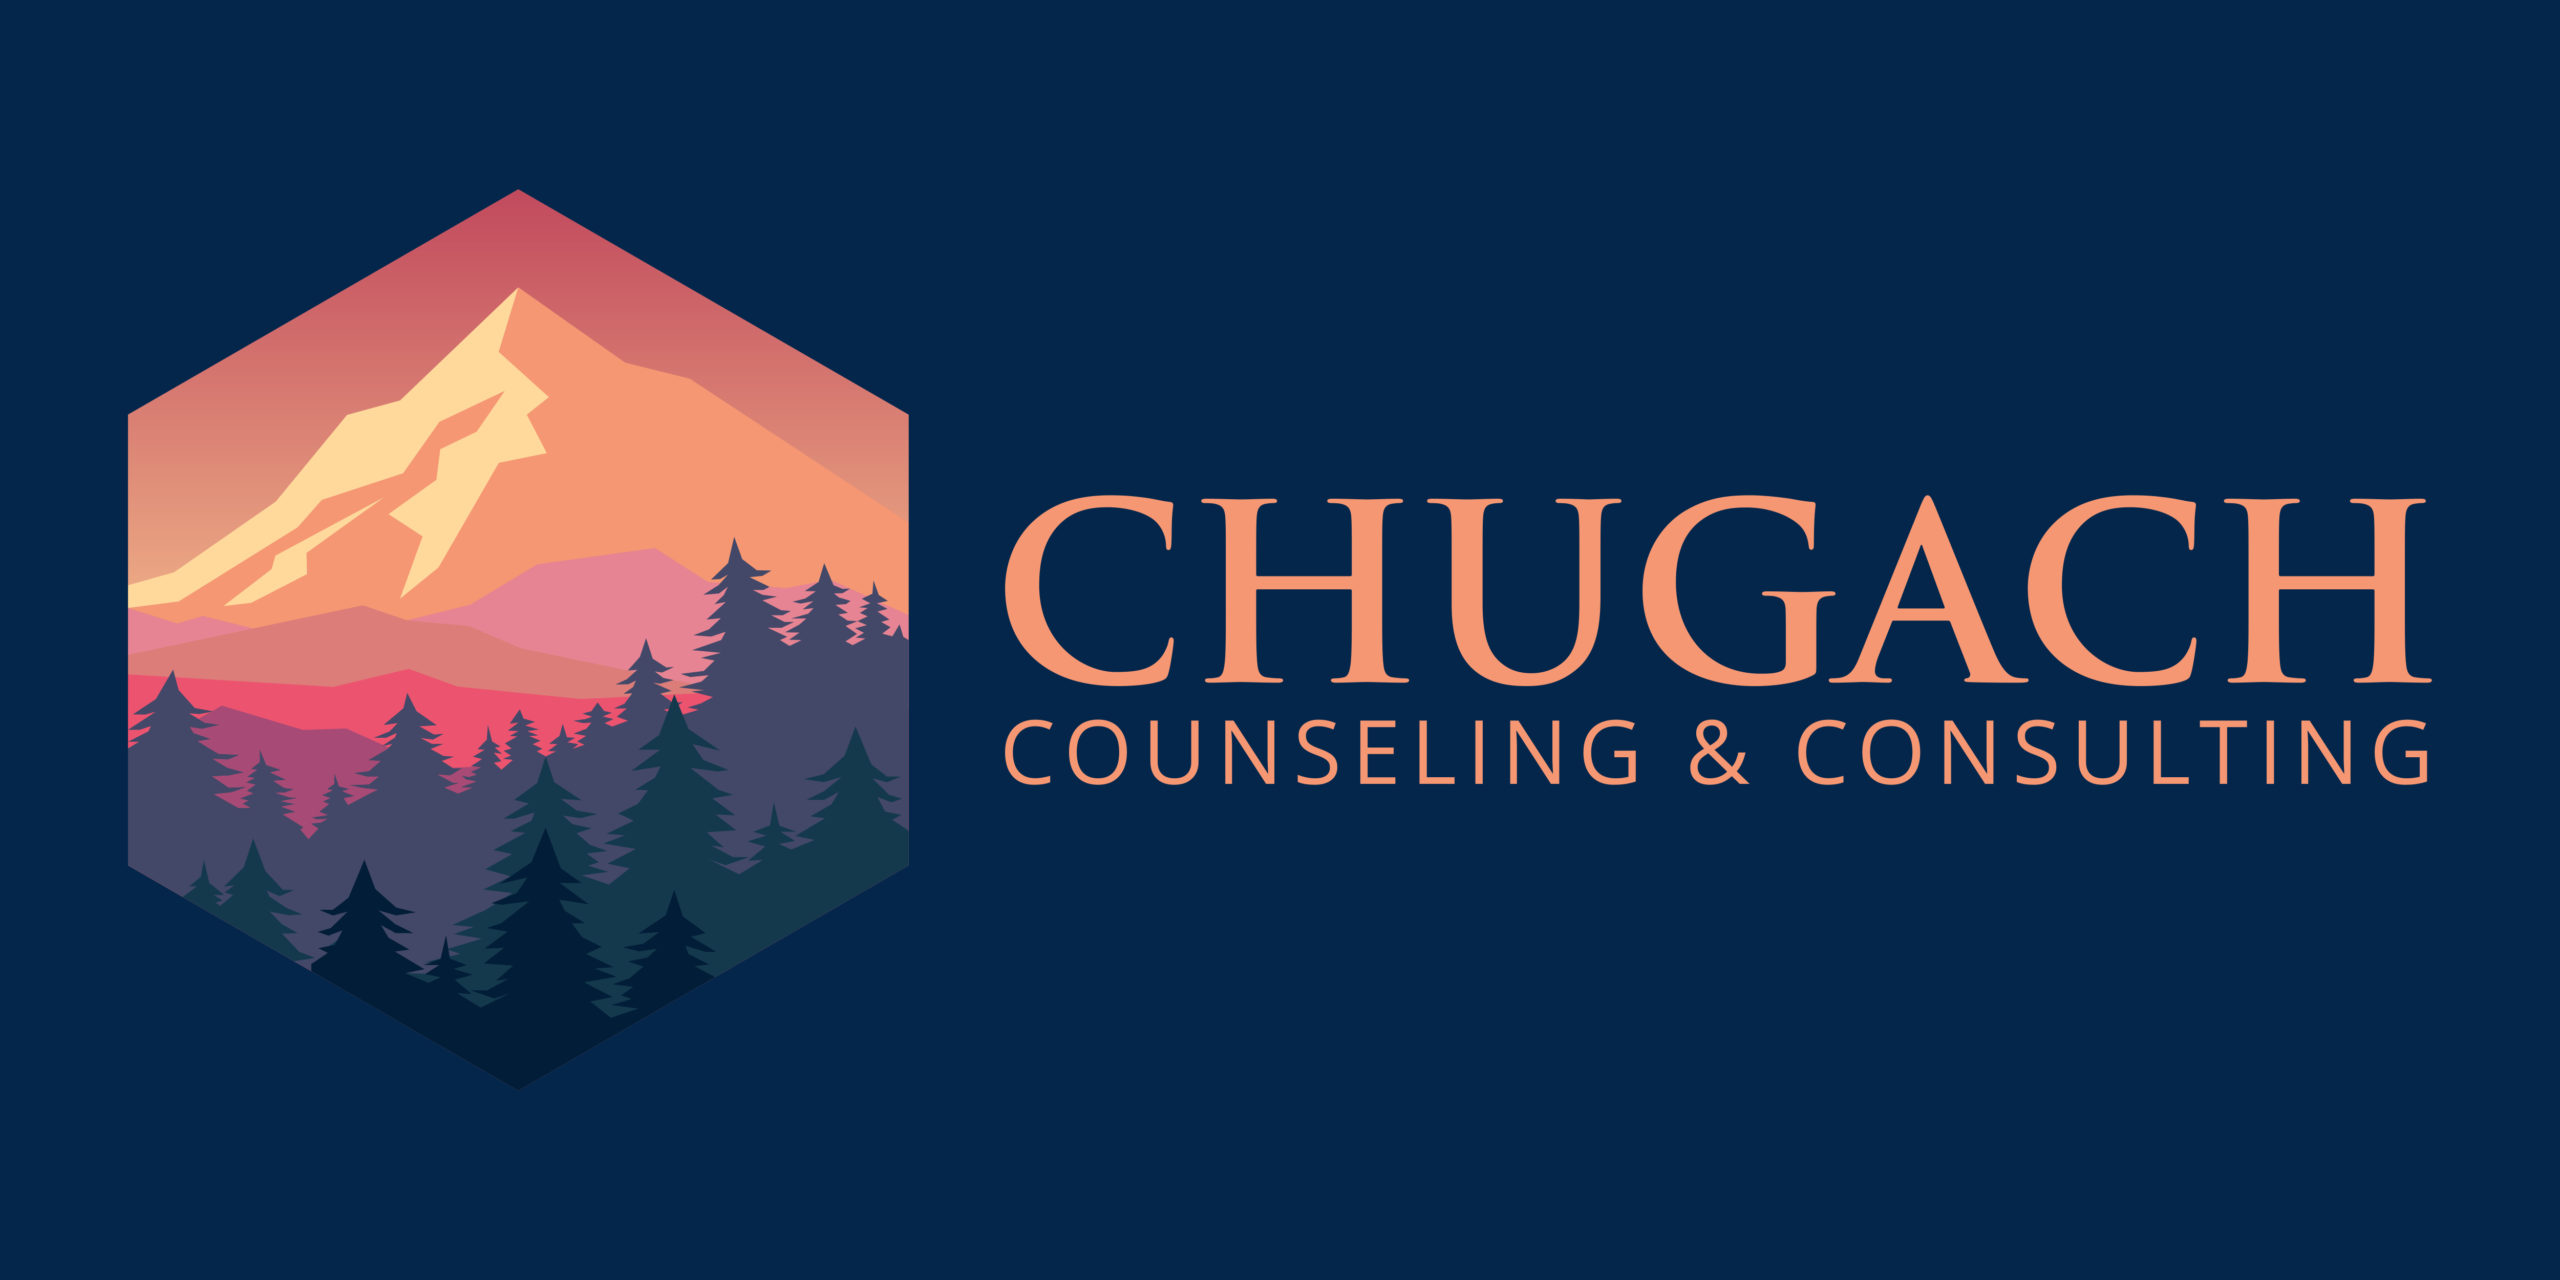 Chugach Counseling & Consulting LLC